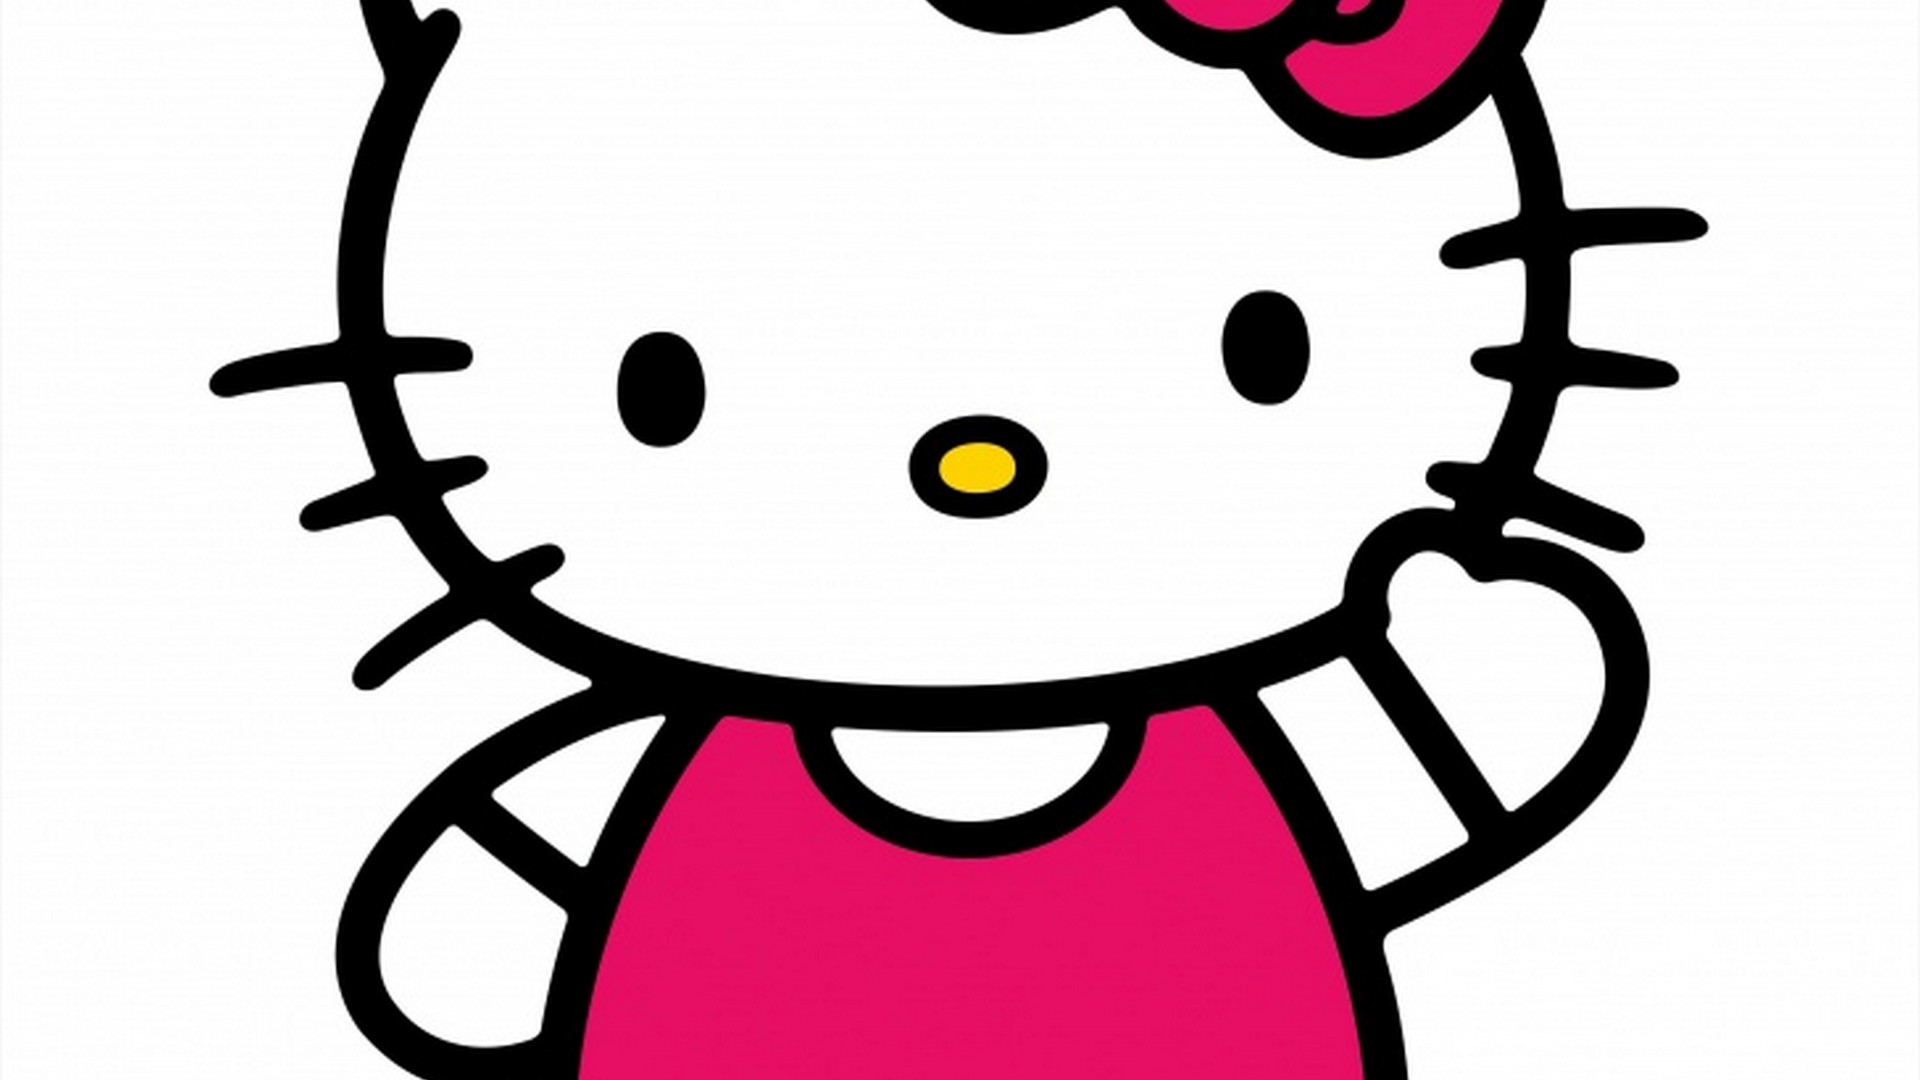 HD Wallpaper Hello Kitty Characters with image resolution 1920x1080 pixel. You can make this wallpaper for your Desktop Computer Backgrounds, Mac Wallpapers, Android Lock screen or iPhone Screensavers